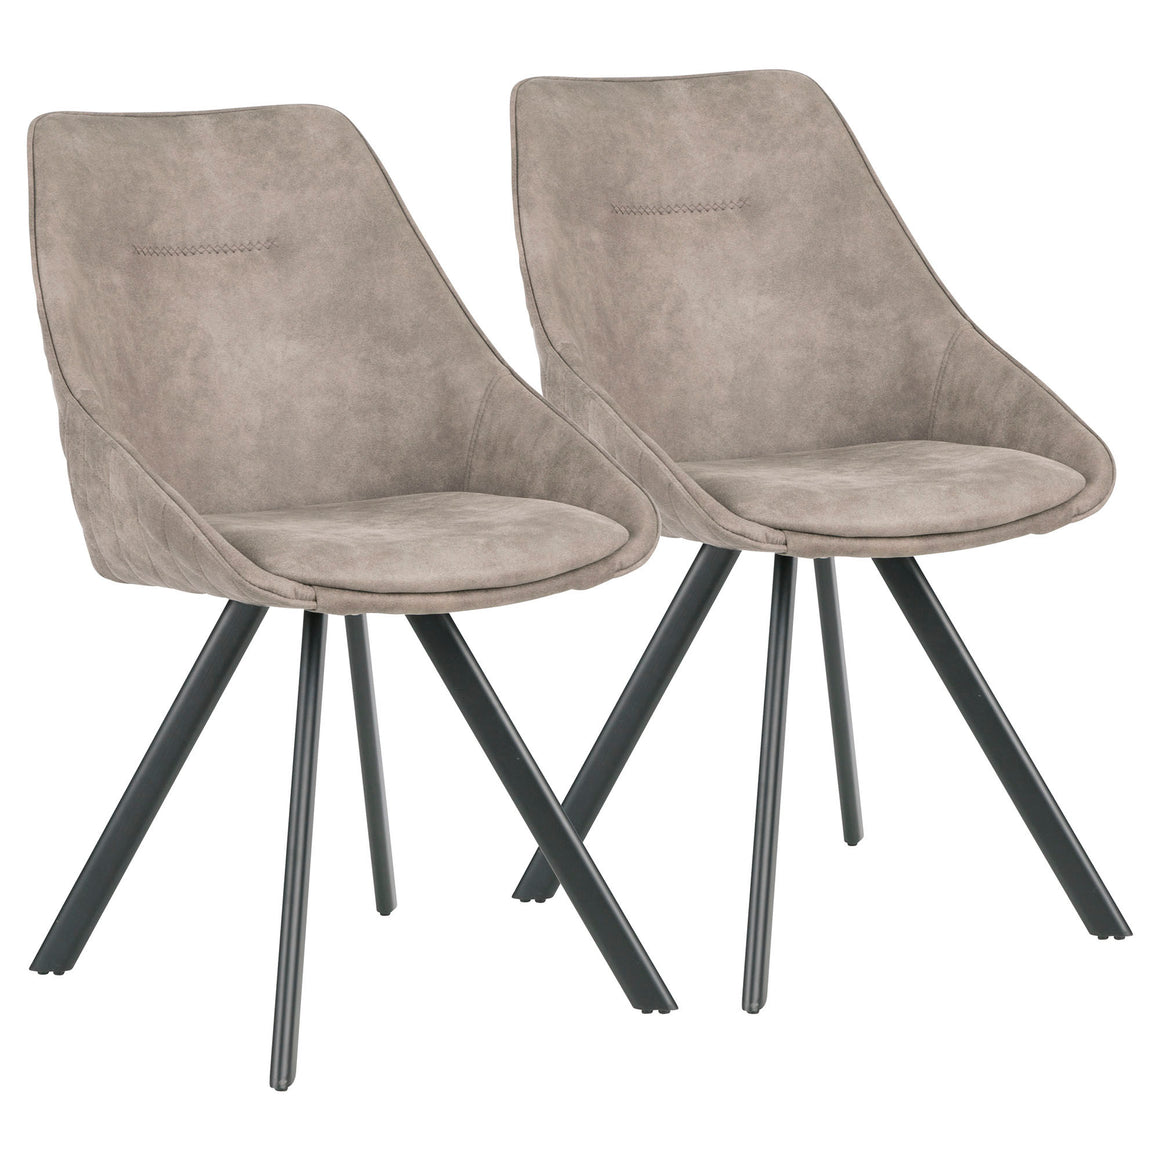 Marche Contemporary Chair in Stone Fabric by LumiSource - Set of 2